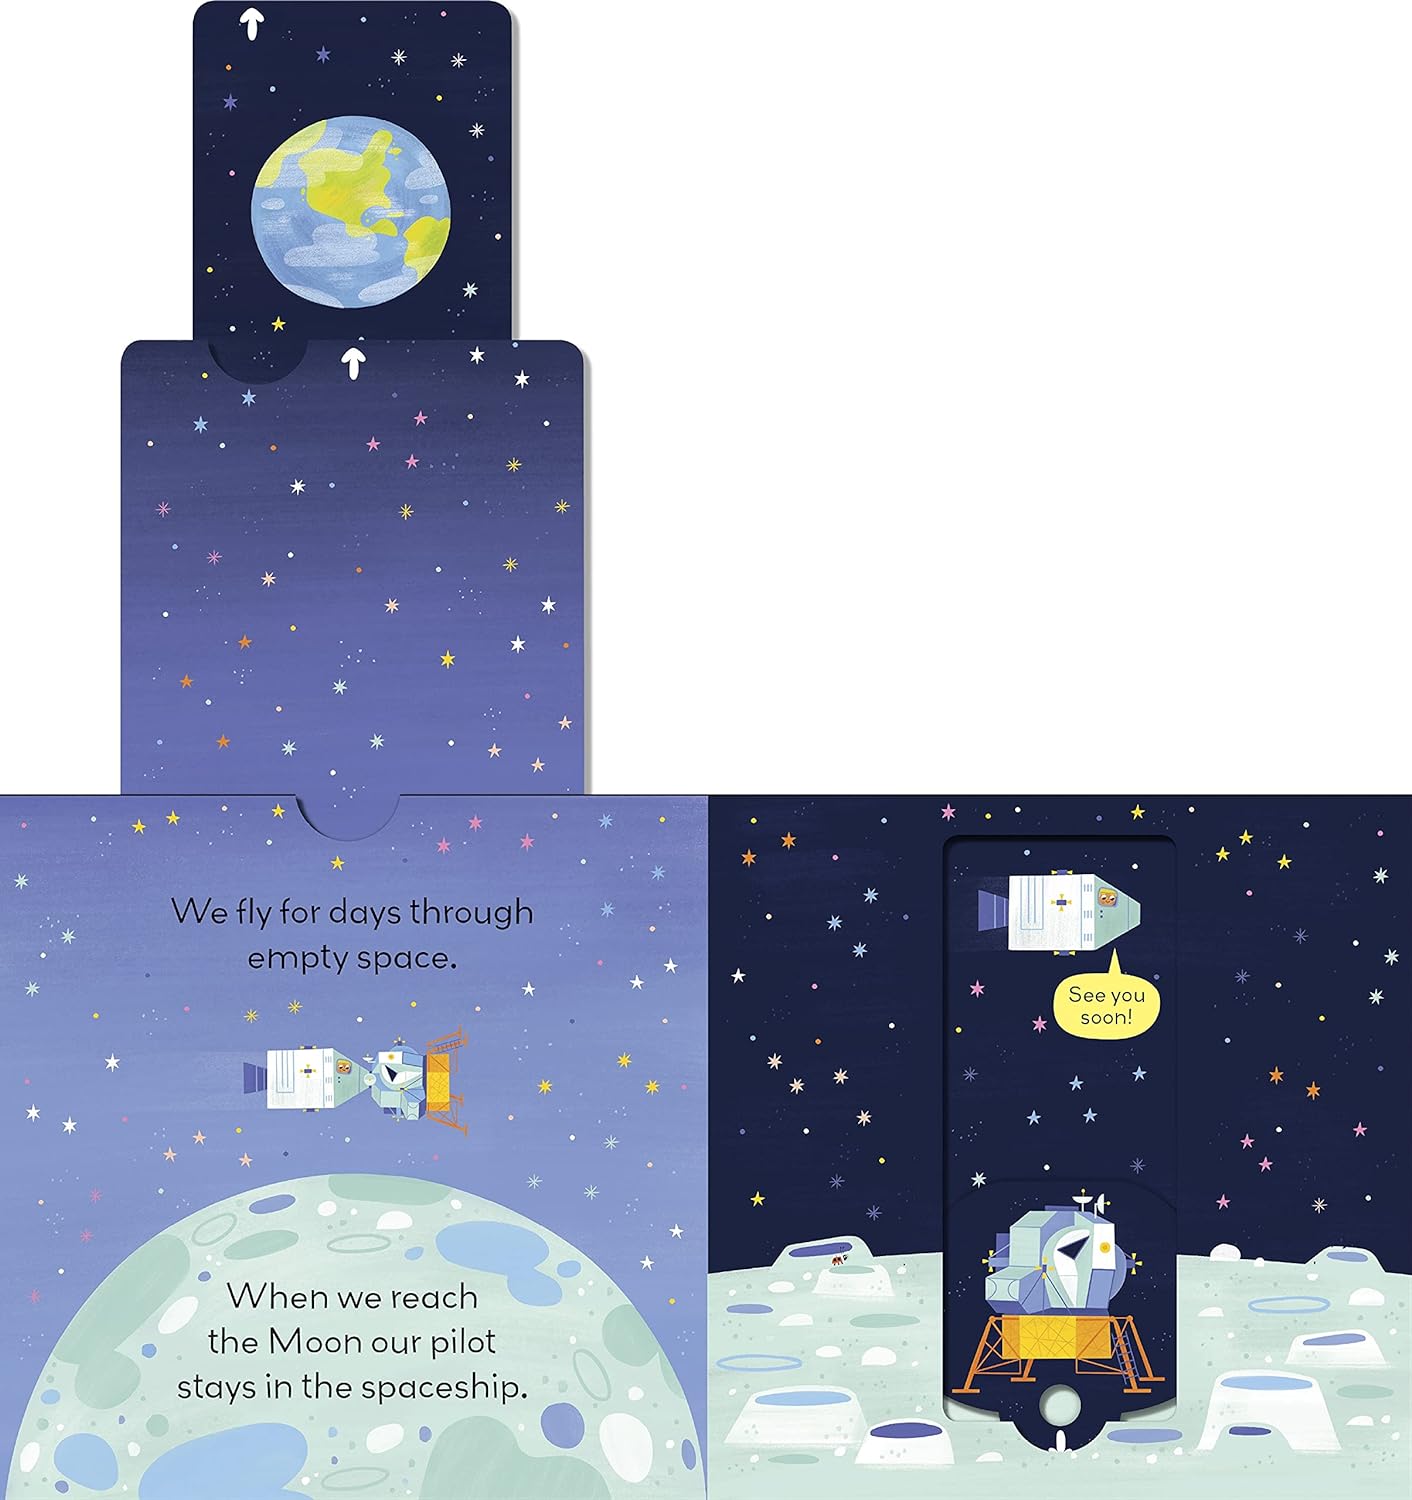 Little World: To The Moon (A Push-And-Pull Adventure)